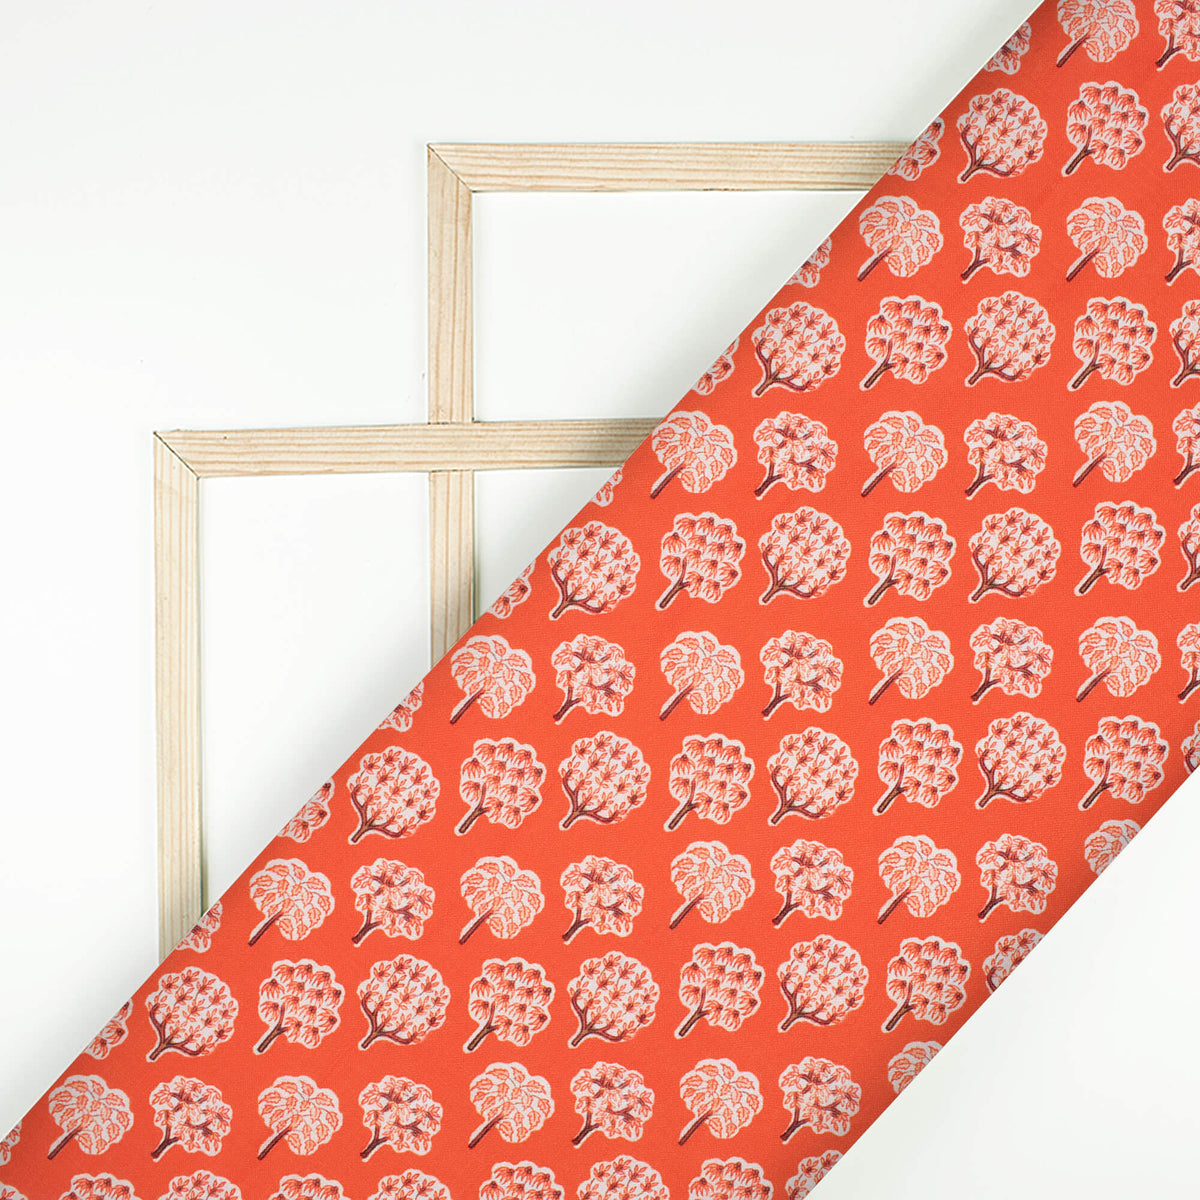 Salamander Orange And Peach Floral Pattern Digital Print Linen Textured Fabric (Width 56 Inches)